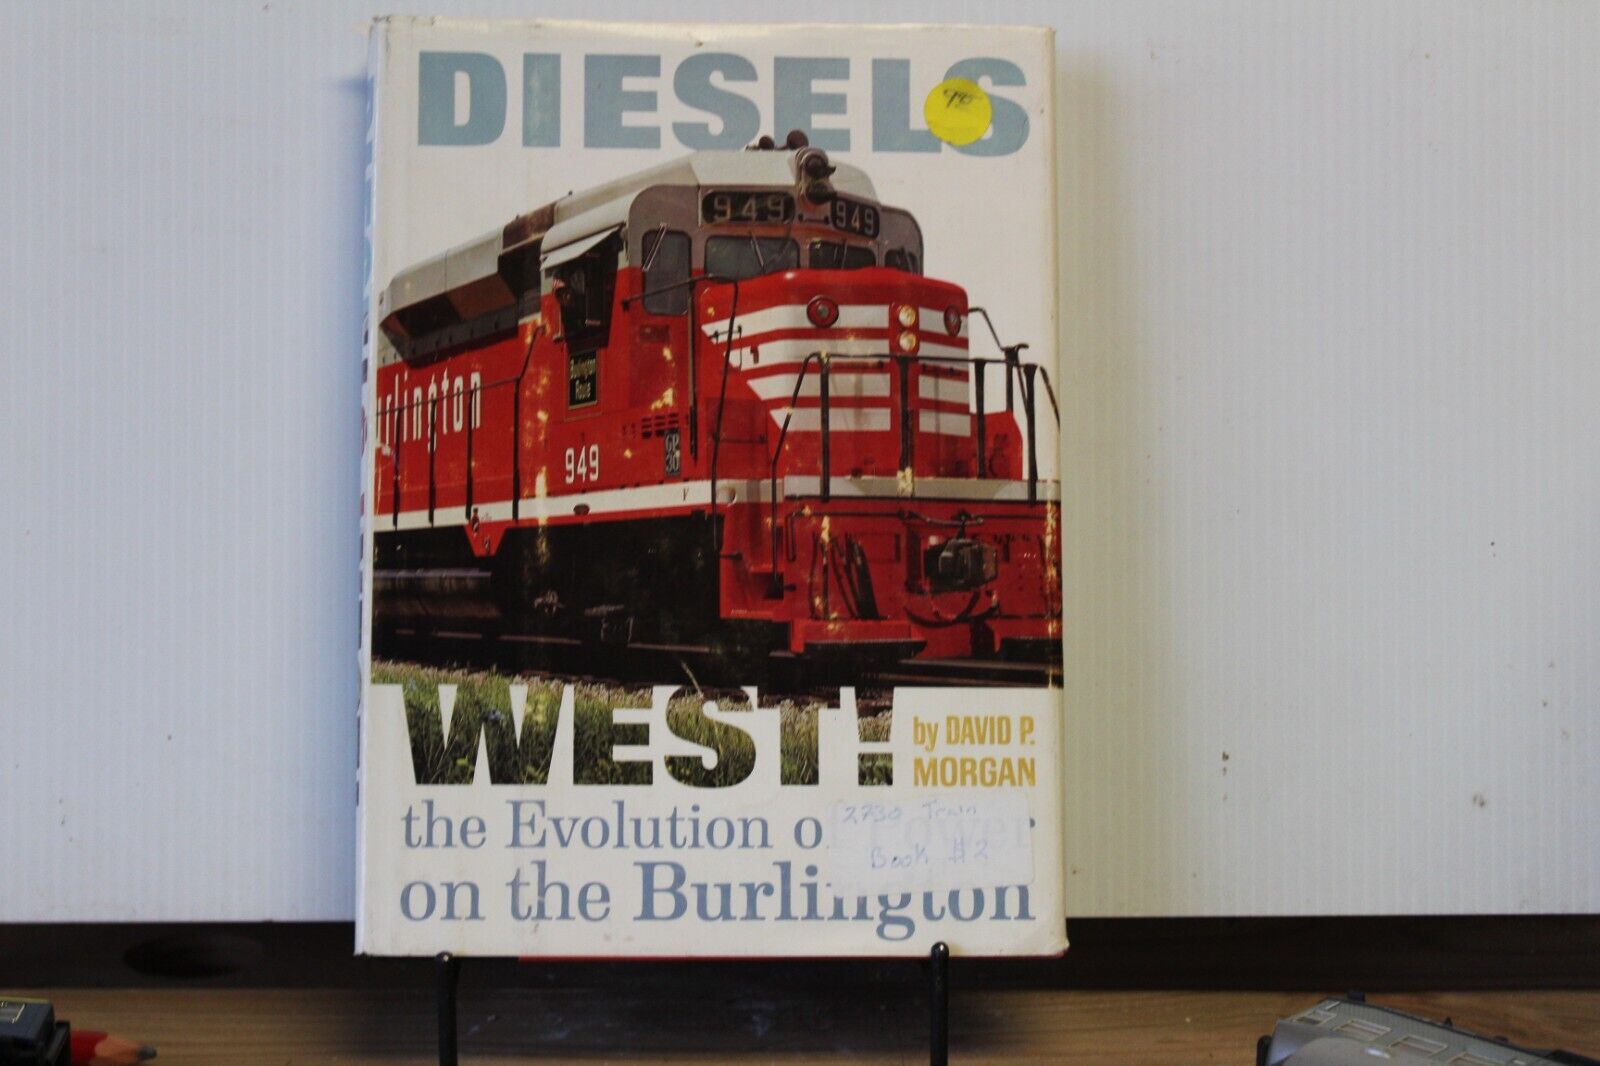 DIESELS WEST THE EVOLUTION OF POWER ON THE BURLINGTON By David P. Morgan, (422)